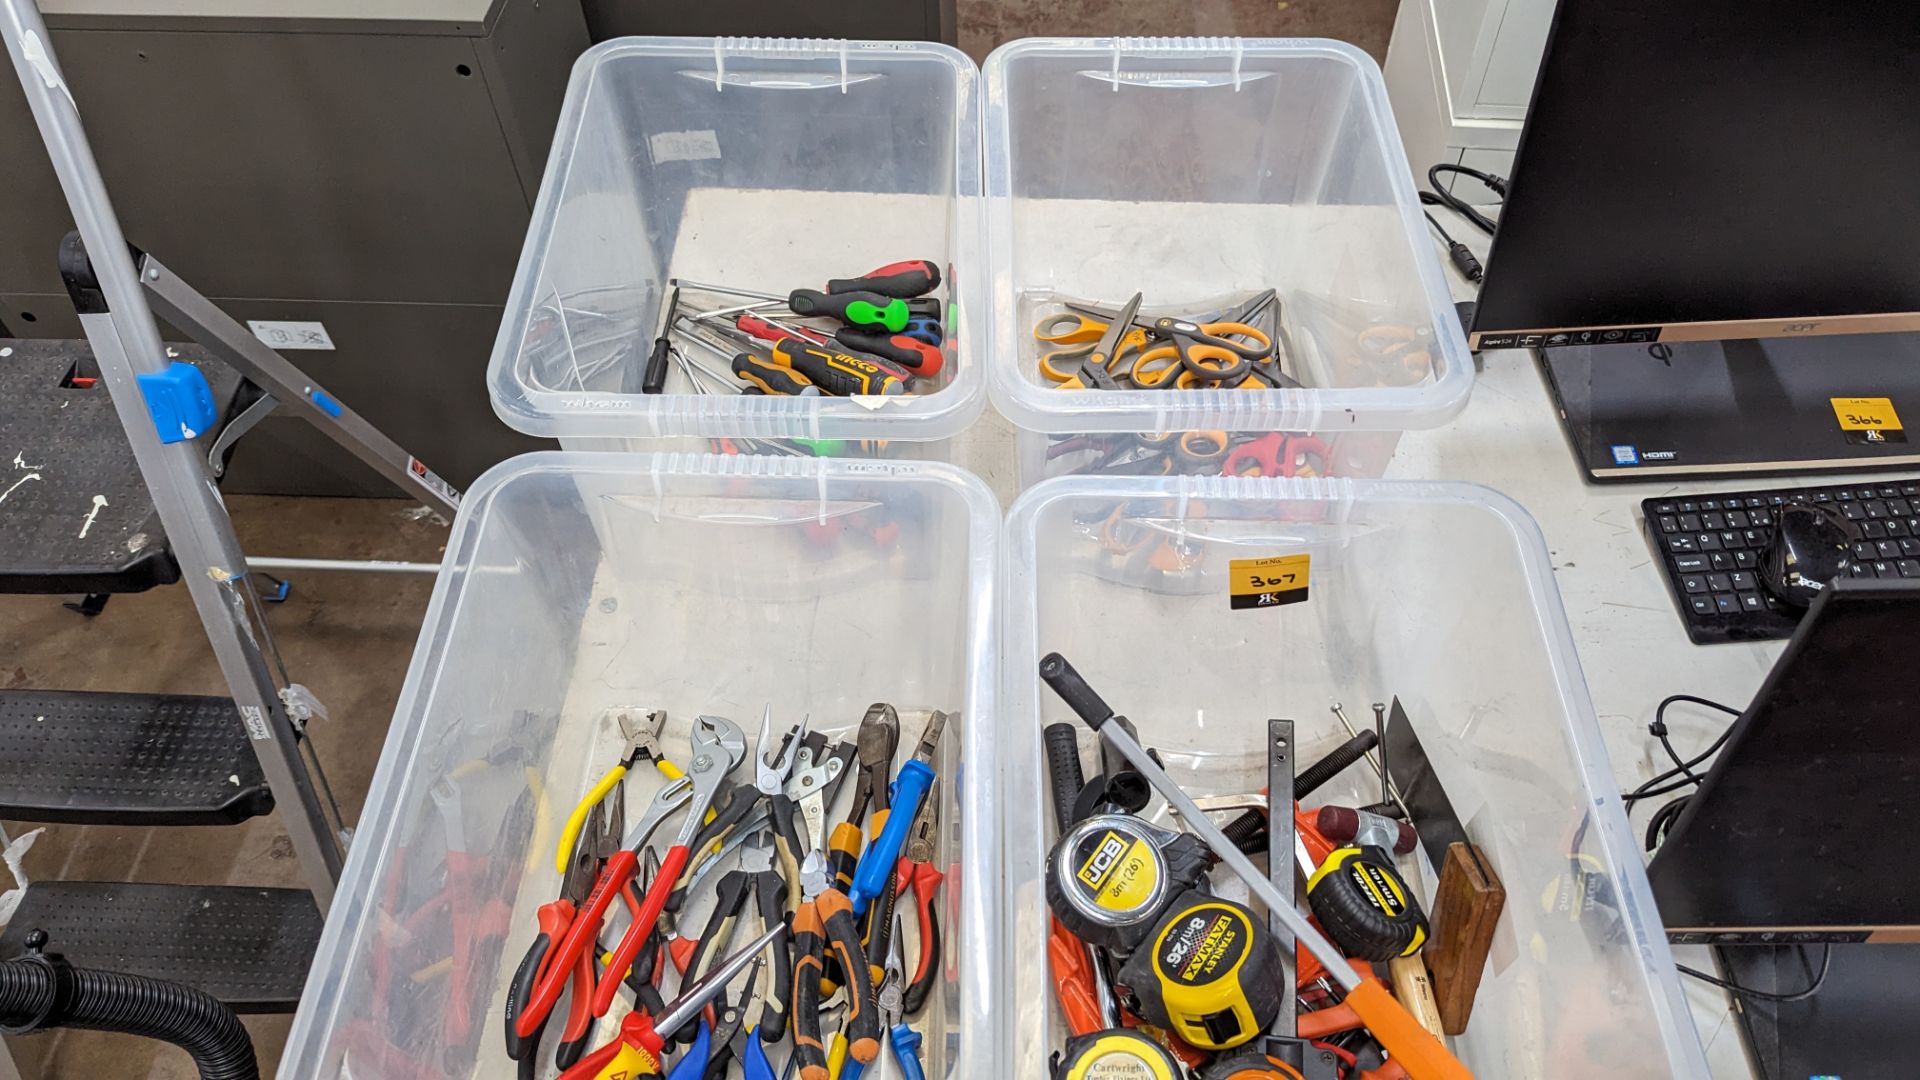 Contents of 4 tubs of tape measures, screwdrivers, hand tools & pliers - Image 8 of 8